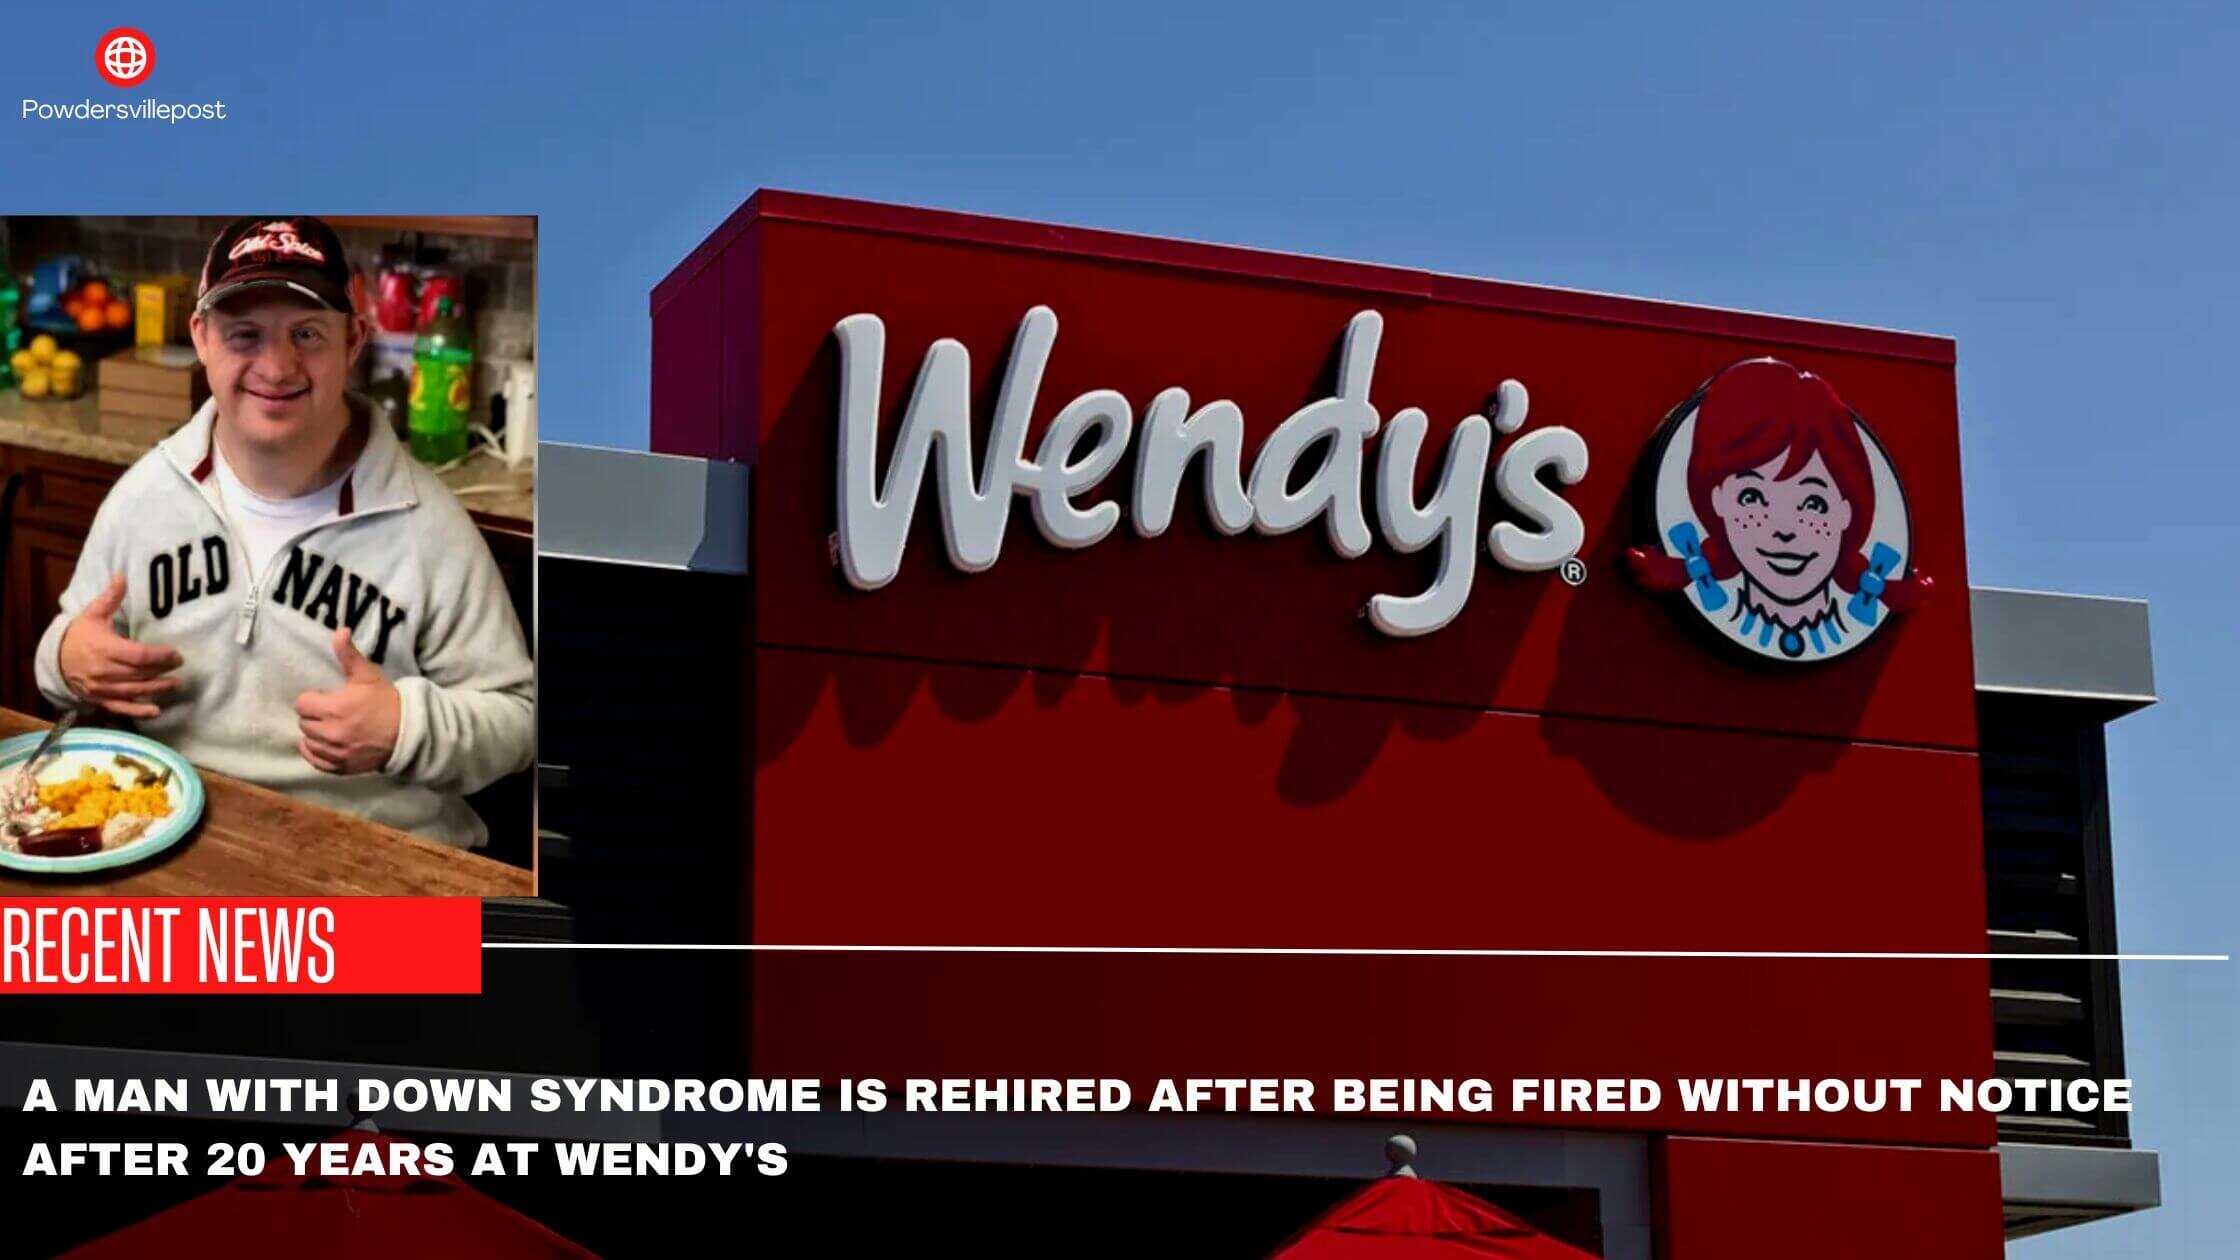 A Man With Down Syndrome Is Rehired After Being Fired Without Notice After 20 Years At Wendy's